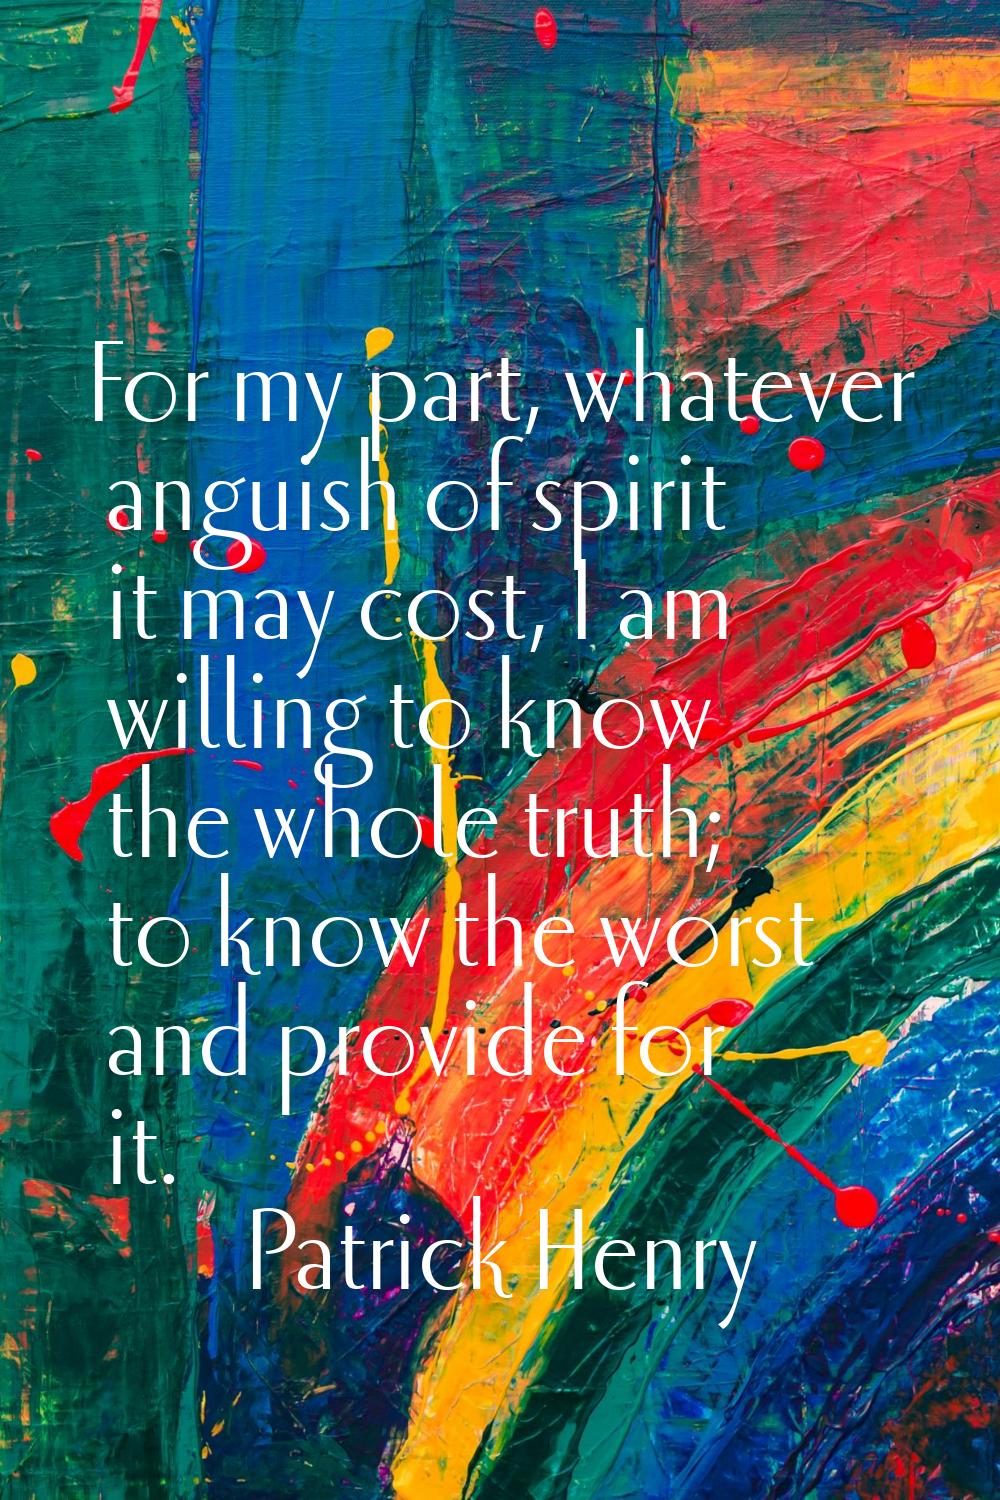 For my part, whatever anguish of spirit it may cost, I am willing to know the whole truth; to know 